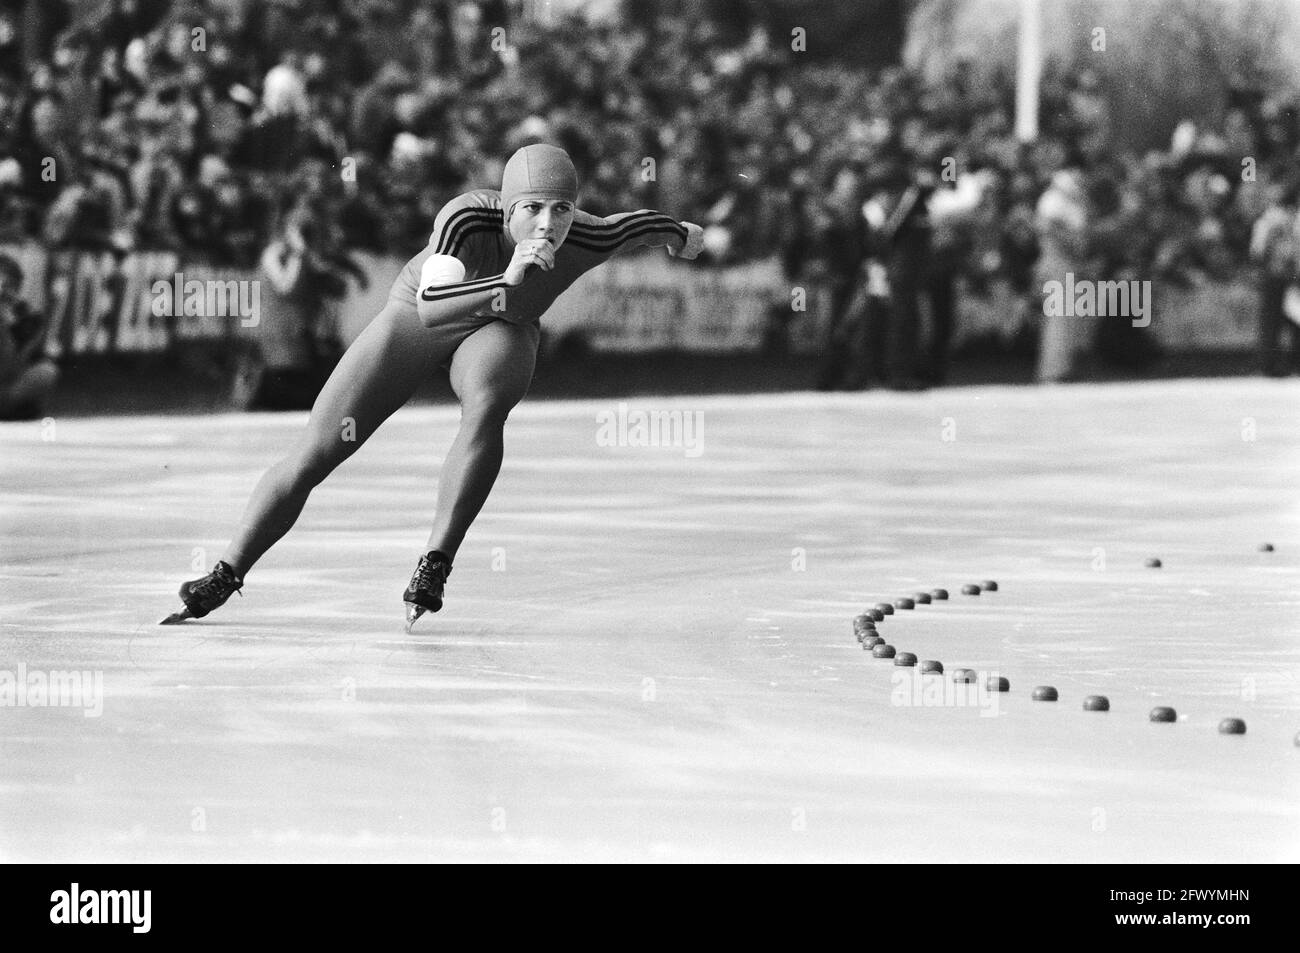 Ria Visser at the 1500 meters, January 23, 1983, speed skating, speed skating competitions, sports, The Netherlands, 20th century press agency photo, news to remember, documentary, historic photography 1945-1990, visual stories, human history of the Twentieth Century, capturing moments in time Stock Photo